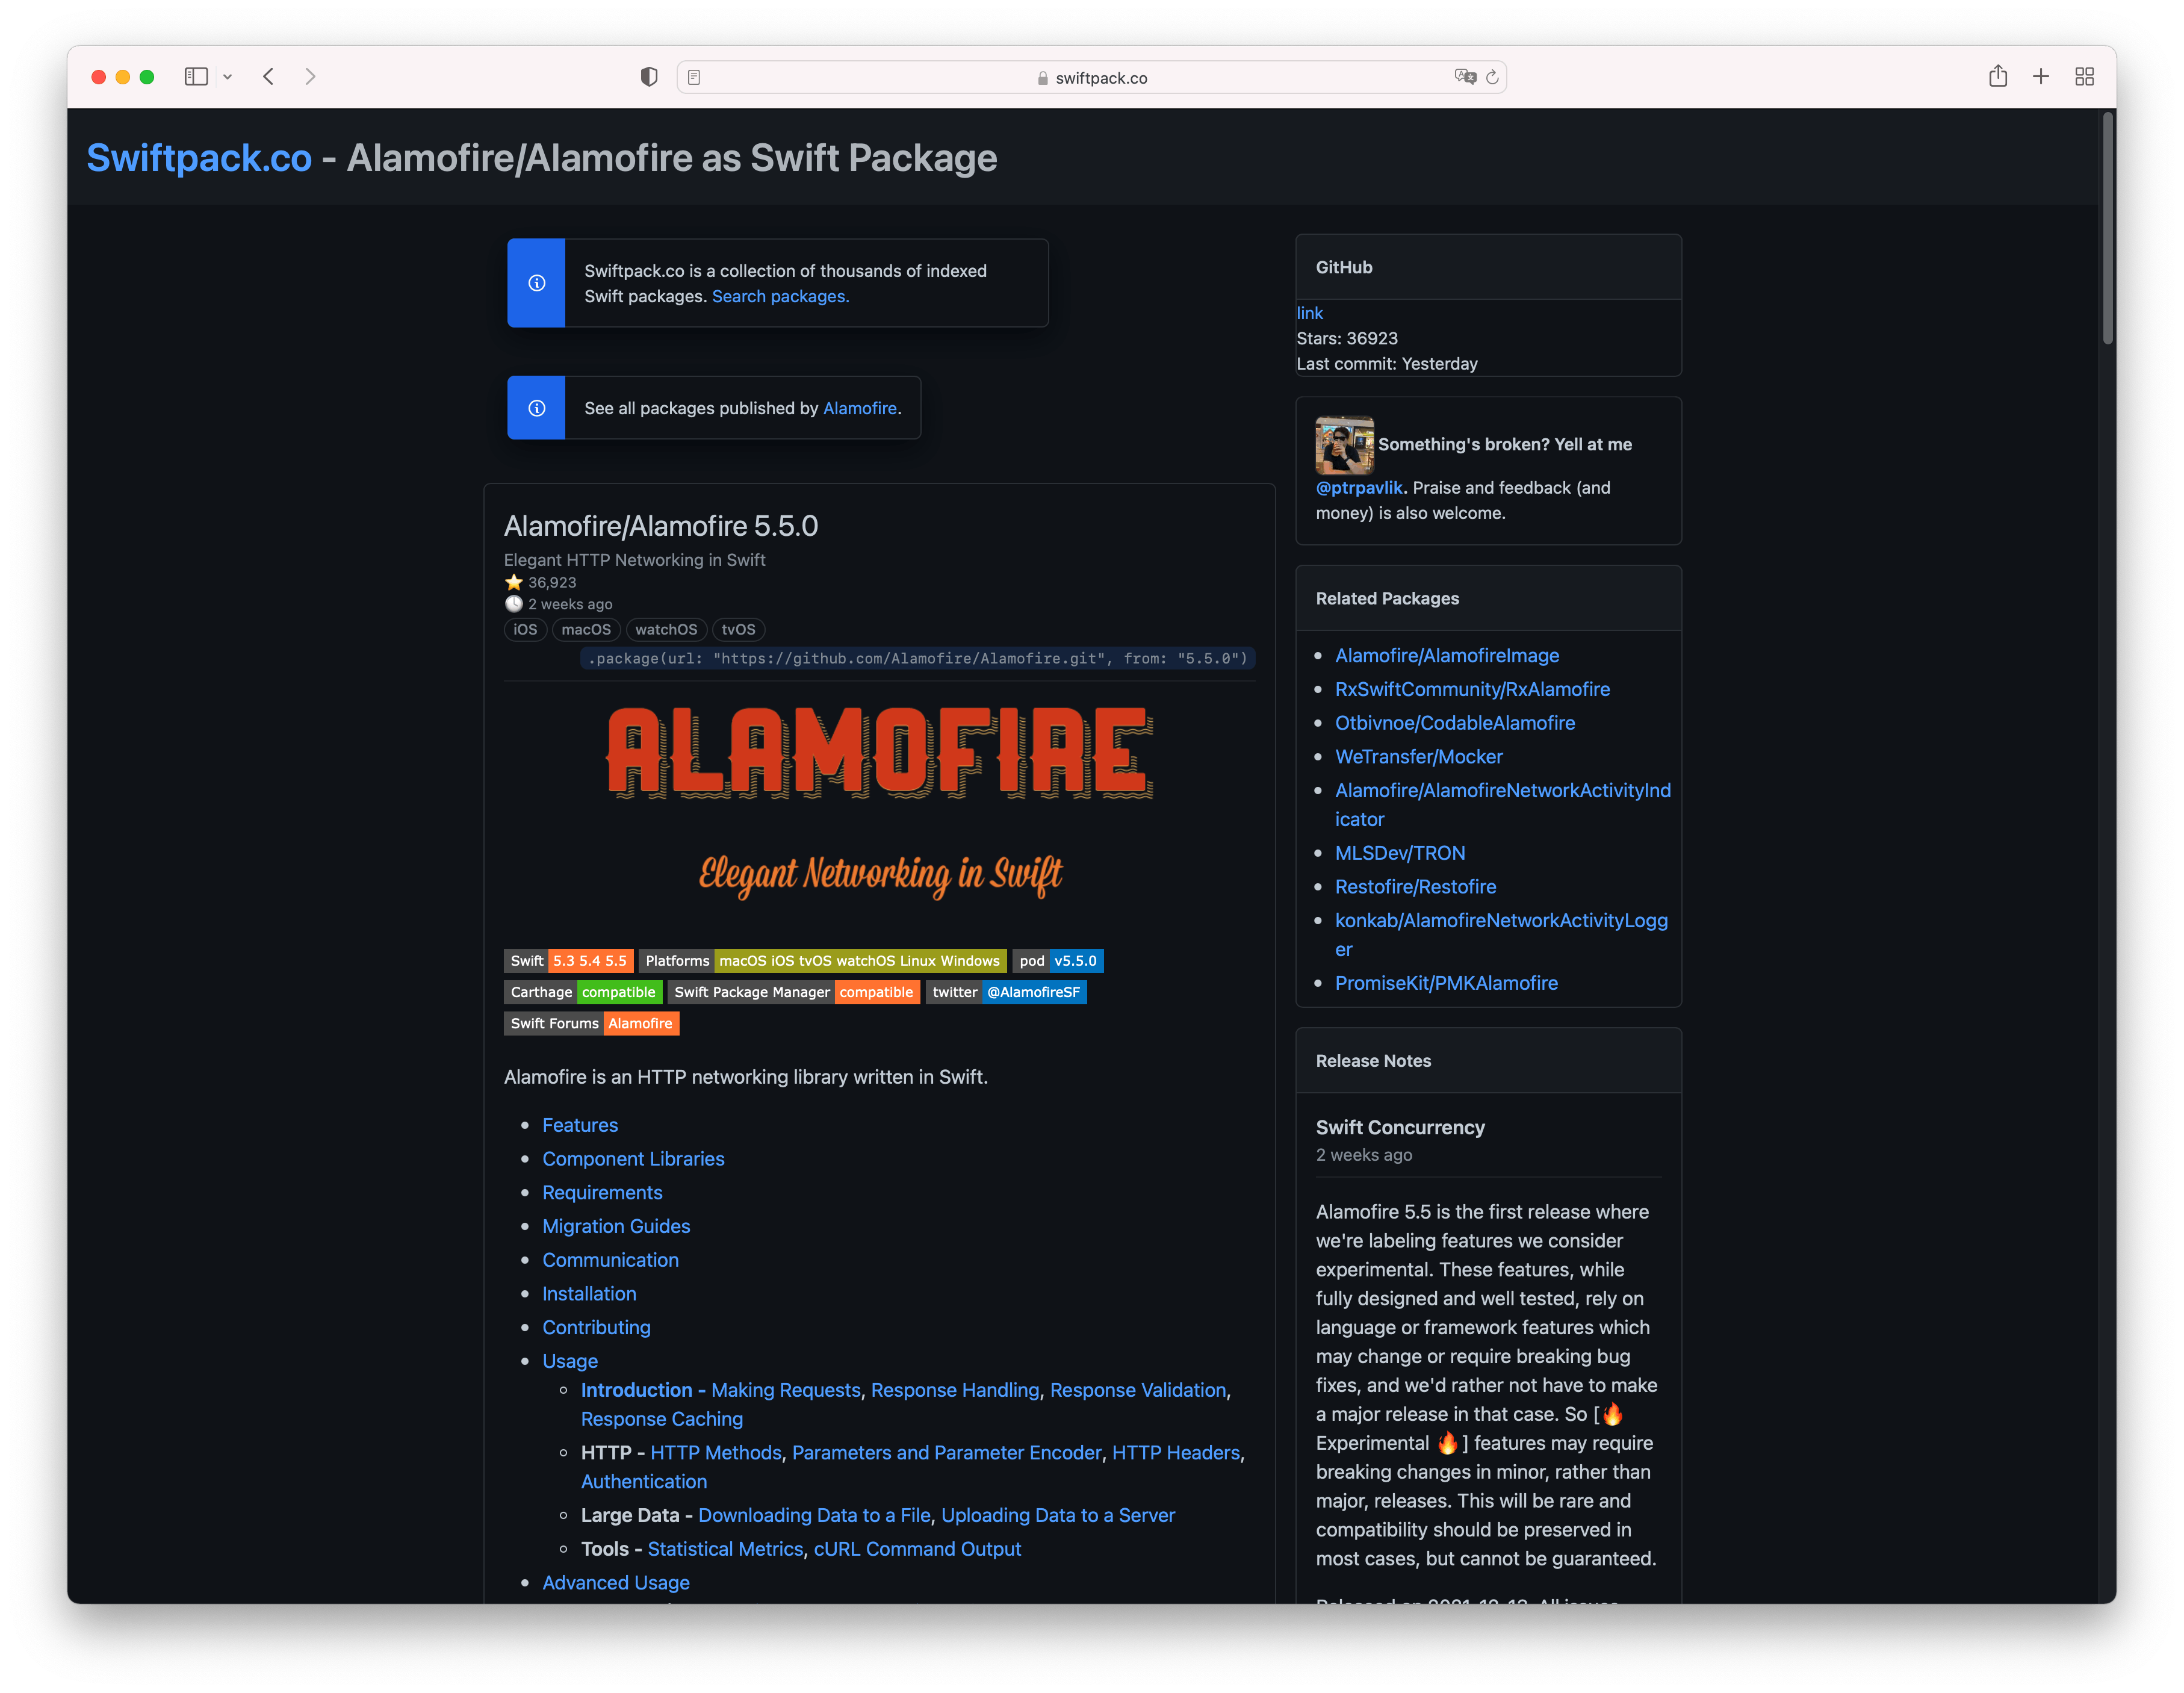 Alamofire package shown on Swift Pack